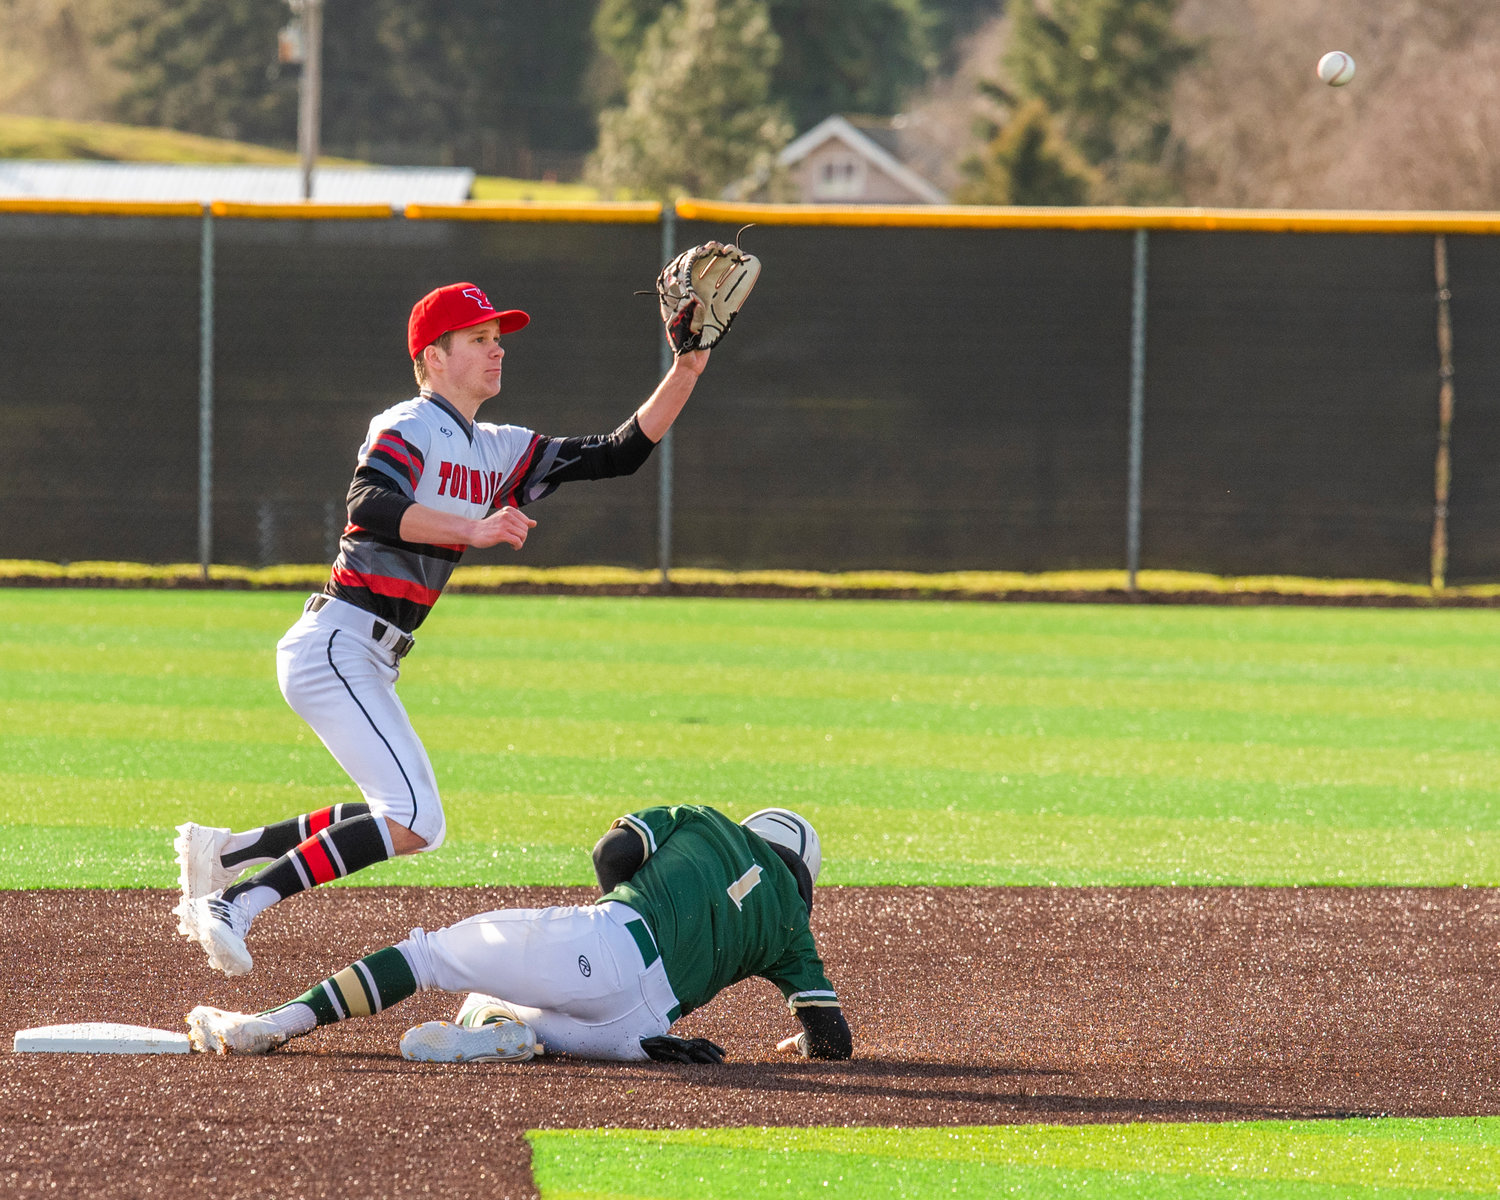 Yelm’s Dawson Schnetz (2) receives a throw down to second during a game on Tuesday, March 15.